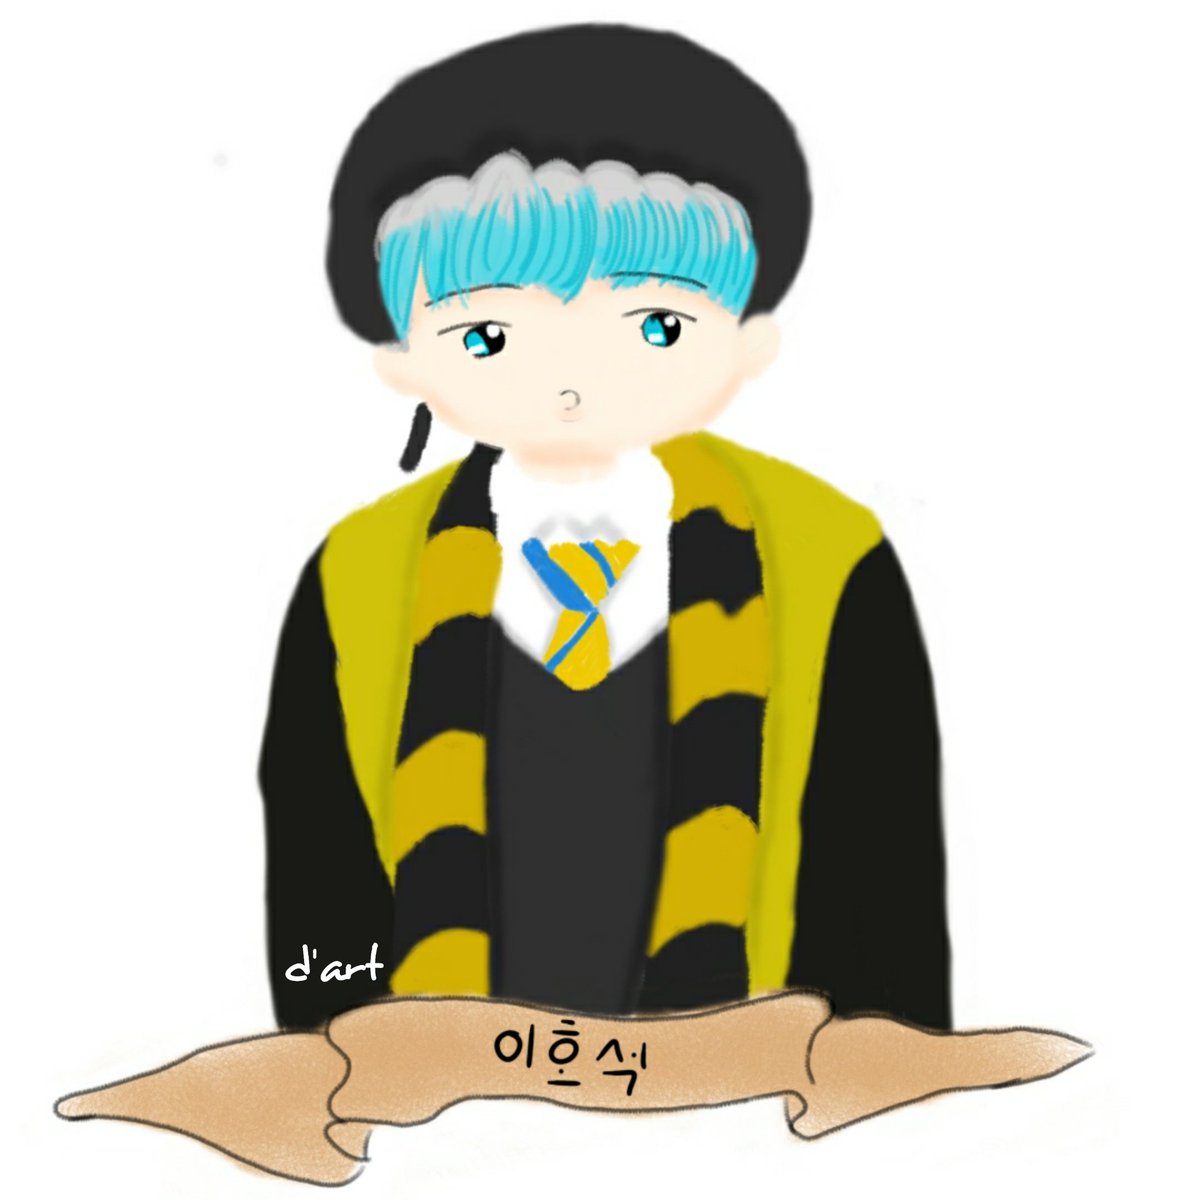 ⠀⠀⠀⠀⠀⠀⠀May 12, 2020Peep!! I forgot I drew this a week before the 5th anniv. But after I finished drawing Kihyun, I wanted to change the concept And this is your picture hehe @official__wonho  #몬스타엑스    #원호  #366dayswithleehoseok